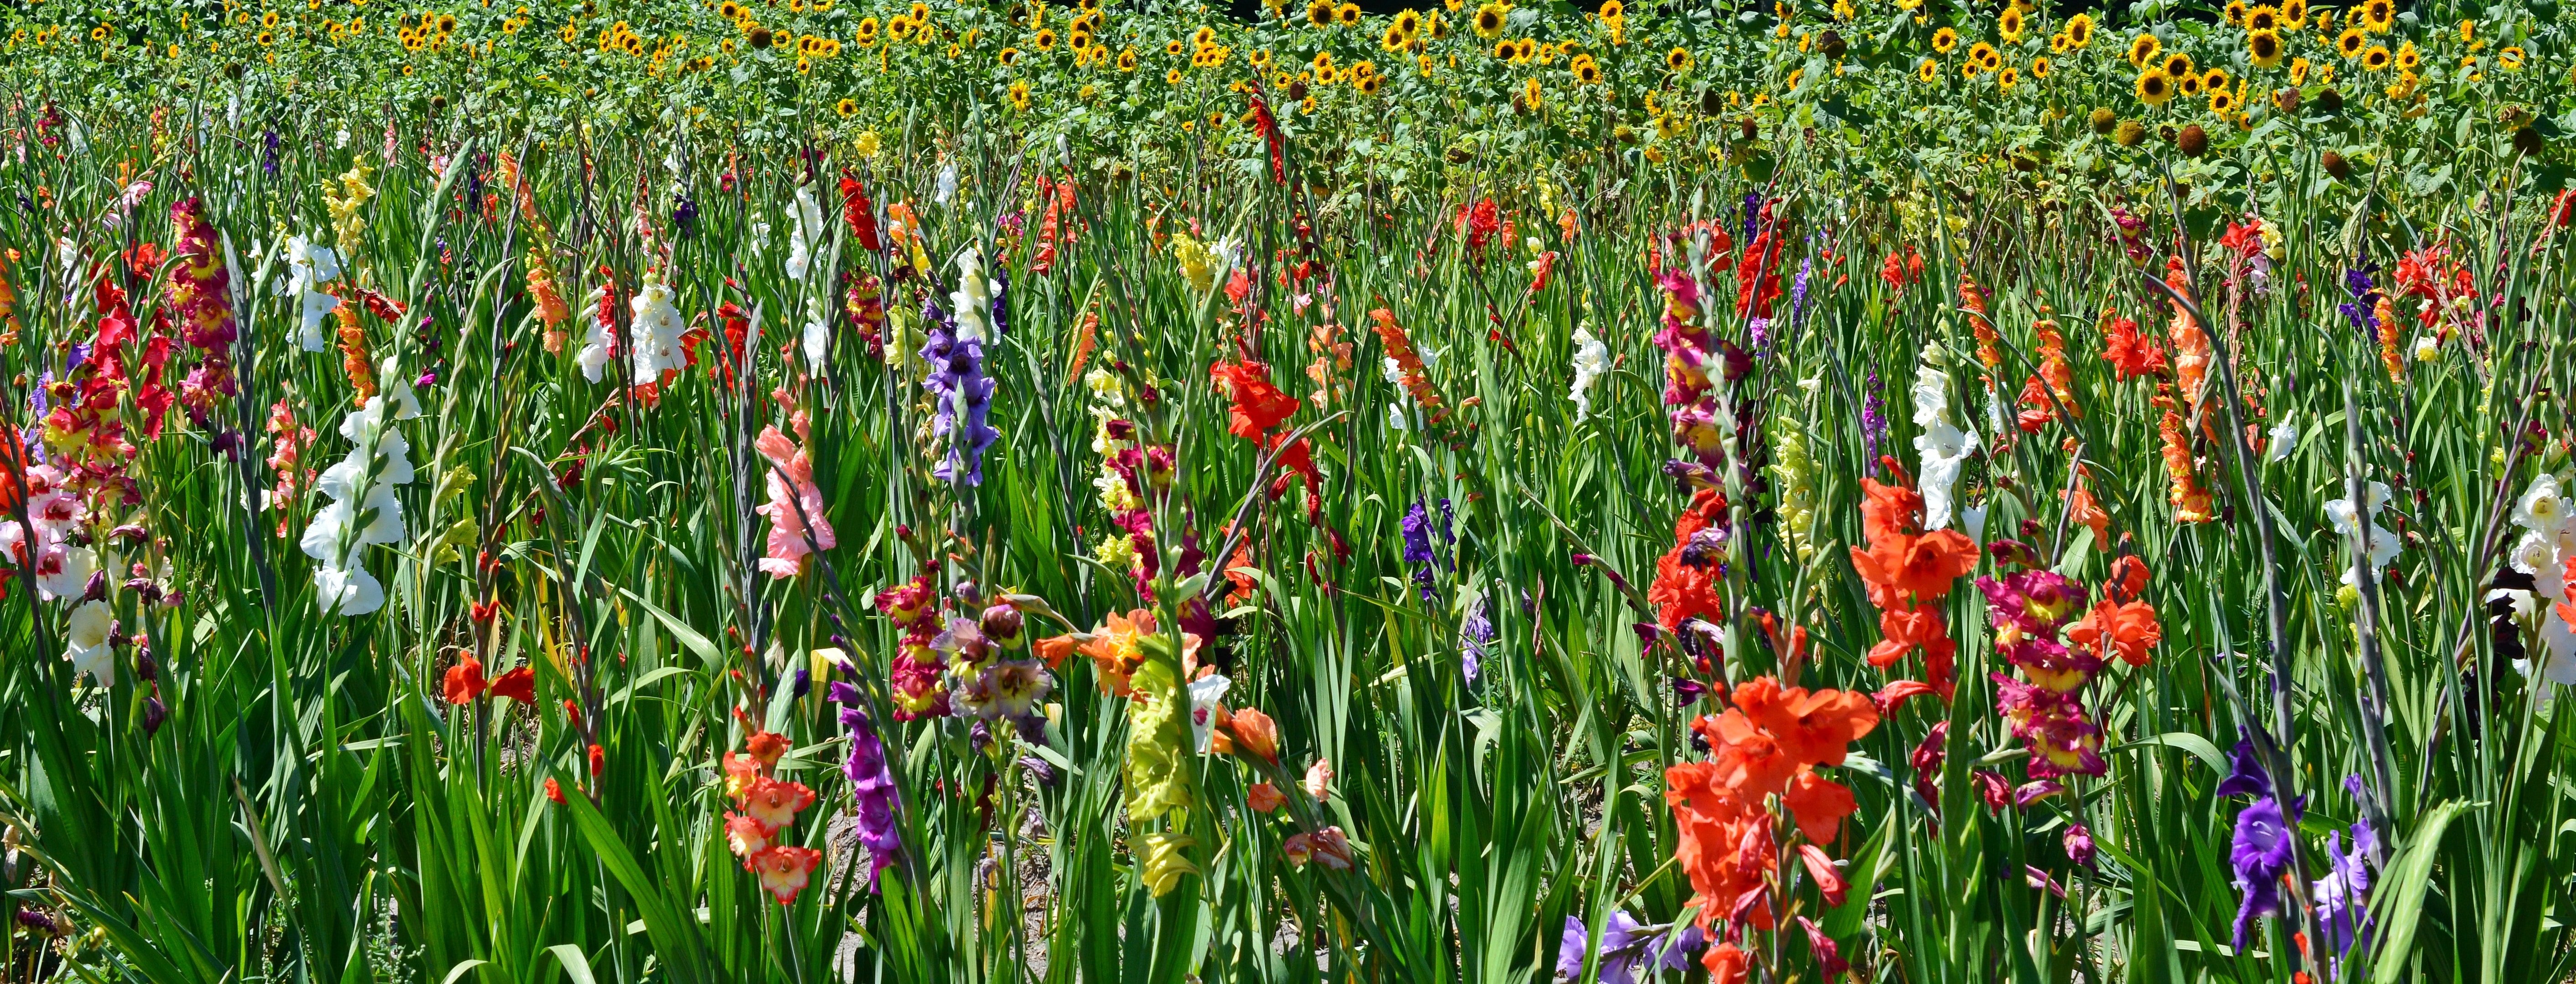 red purple and white flower field